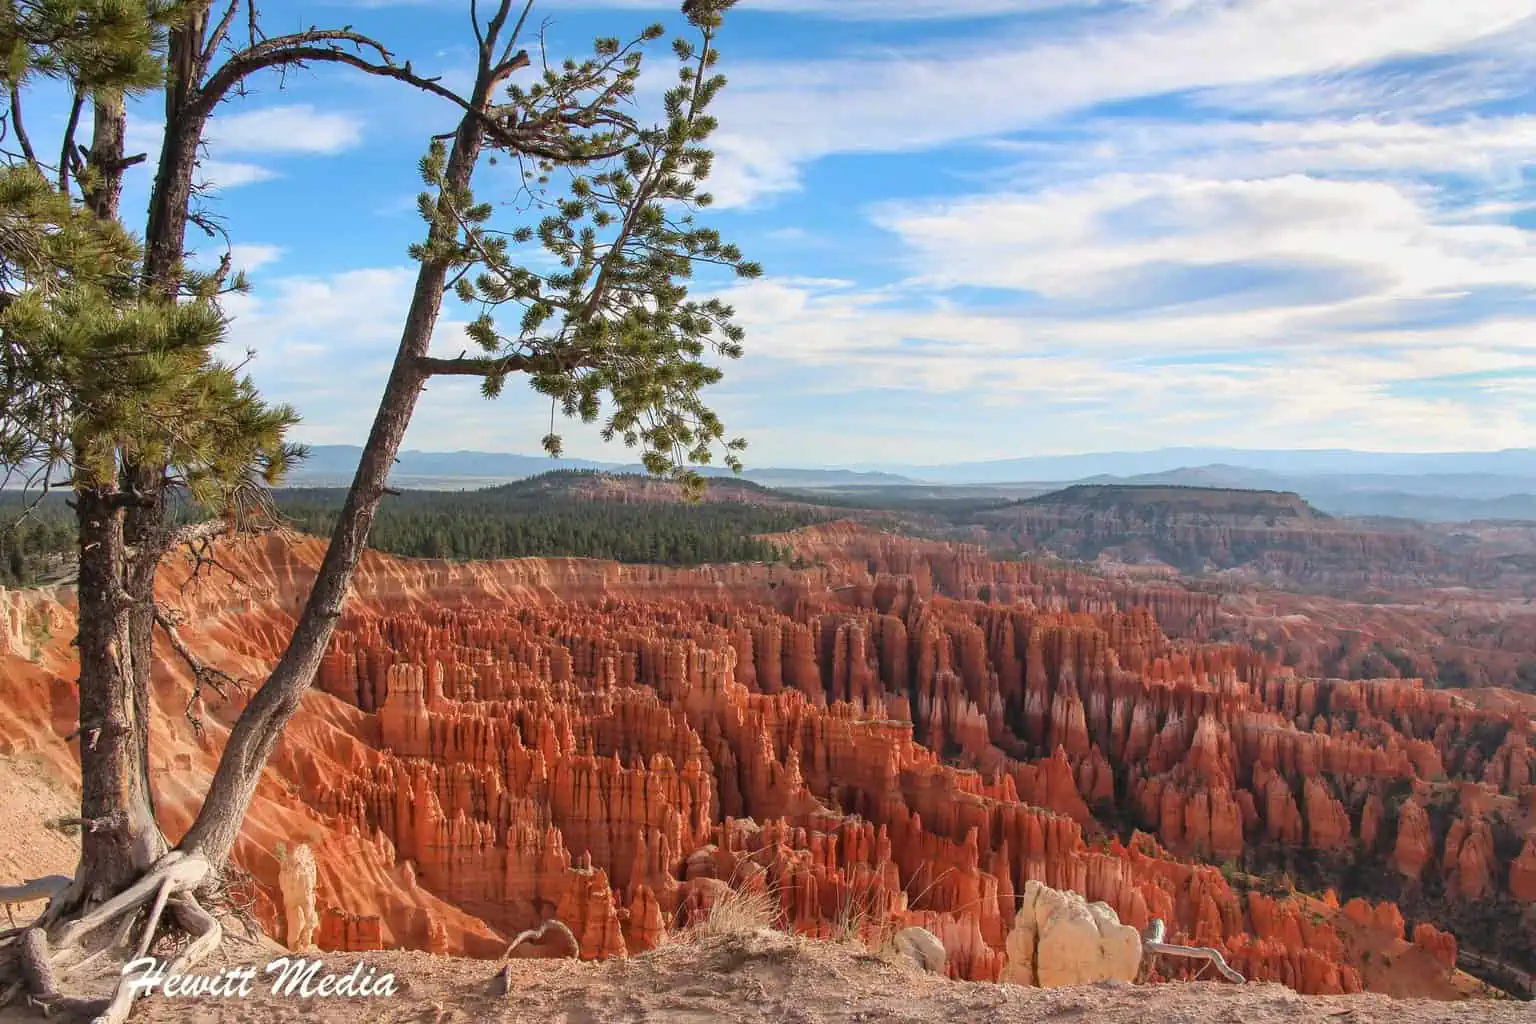 Instagram Travel Photography - Bryce Canyon National Park